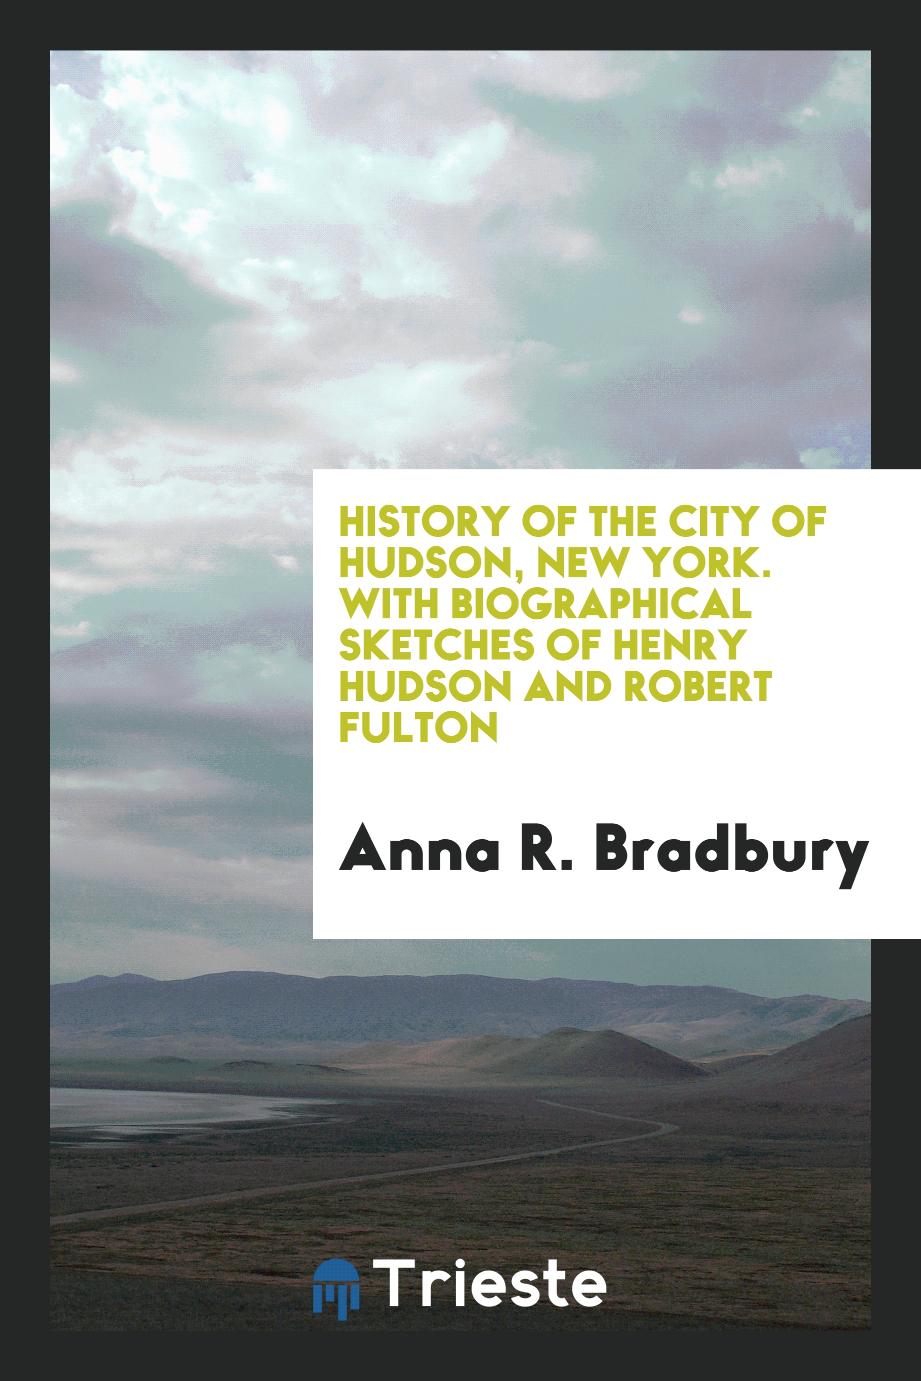 History of the City of Hudson, New York. With Biographical Sketches of Henry Hudson and Robert Fulton